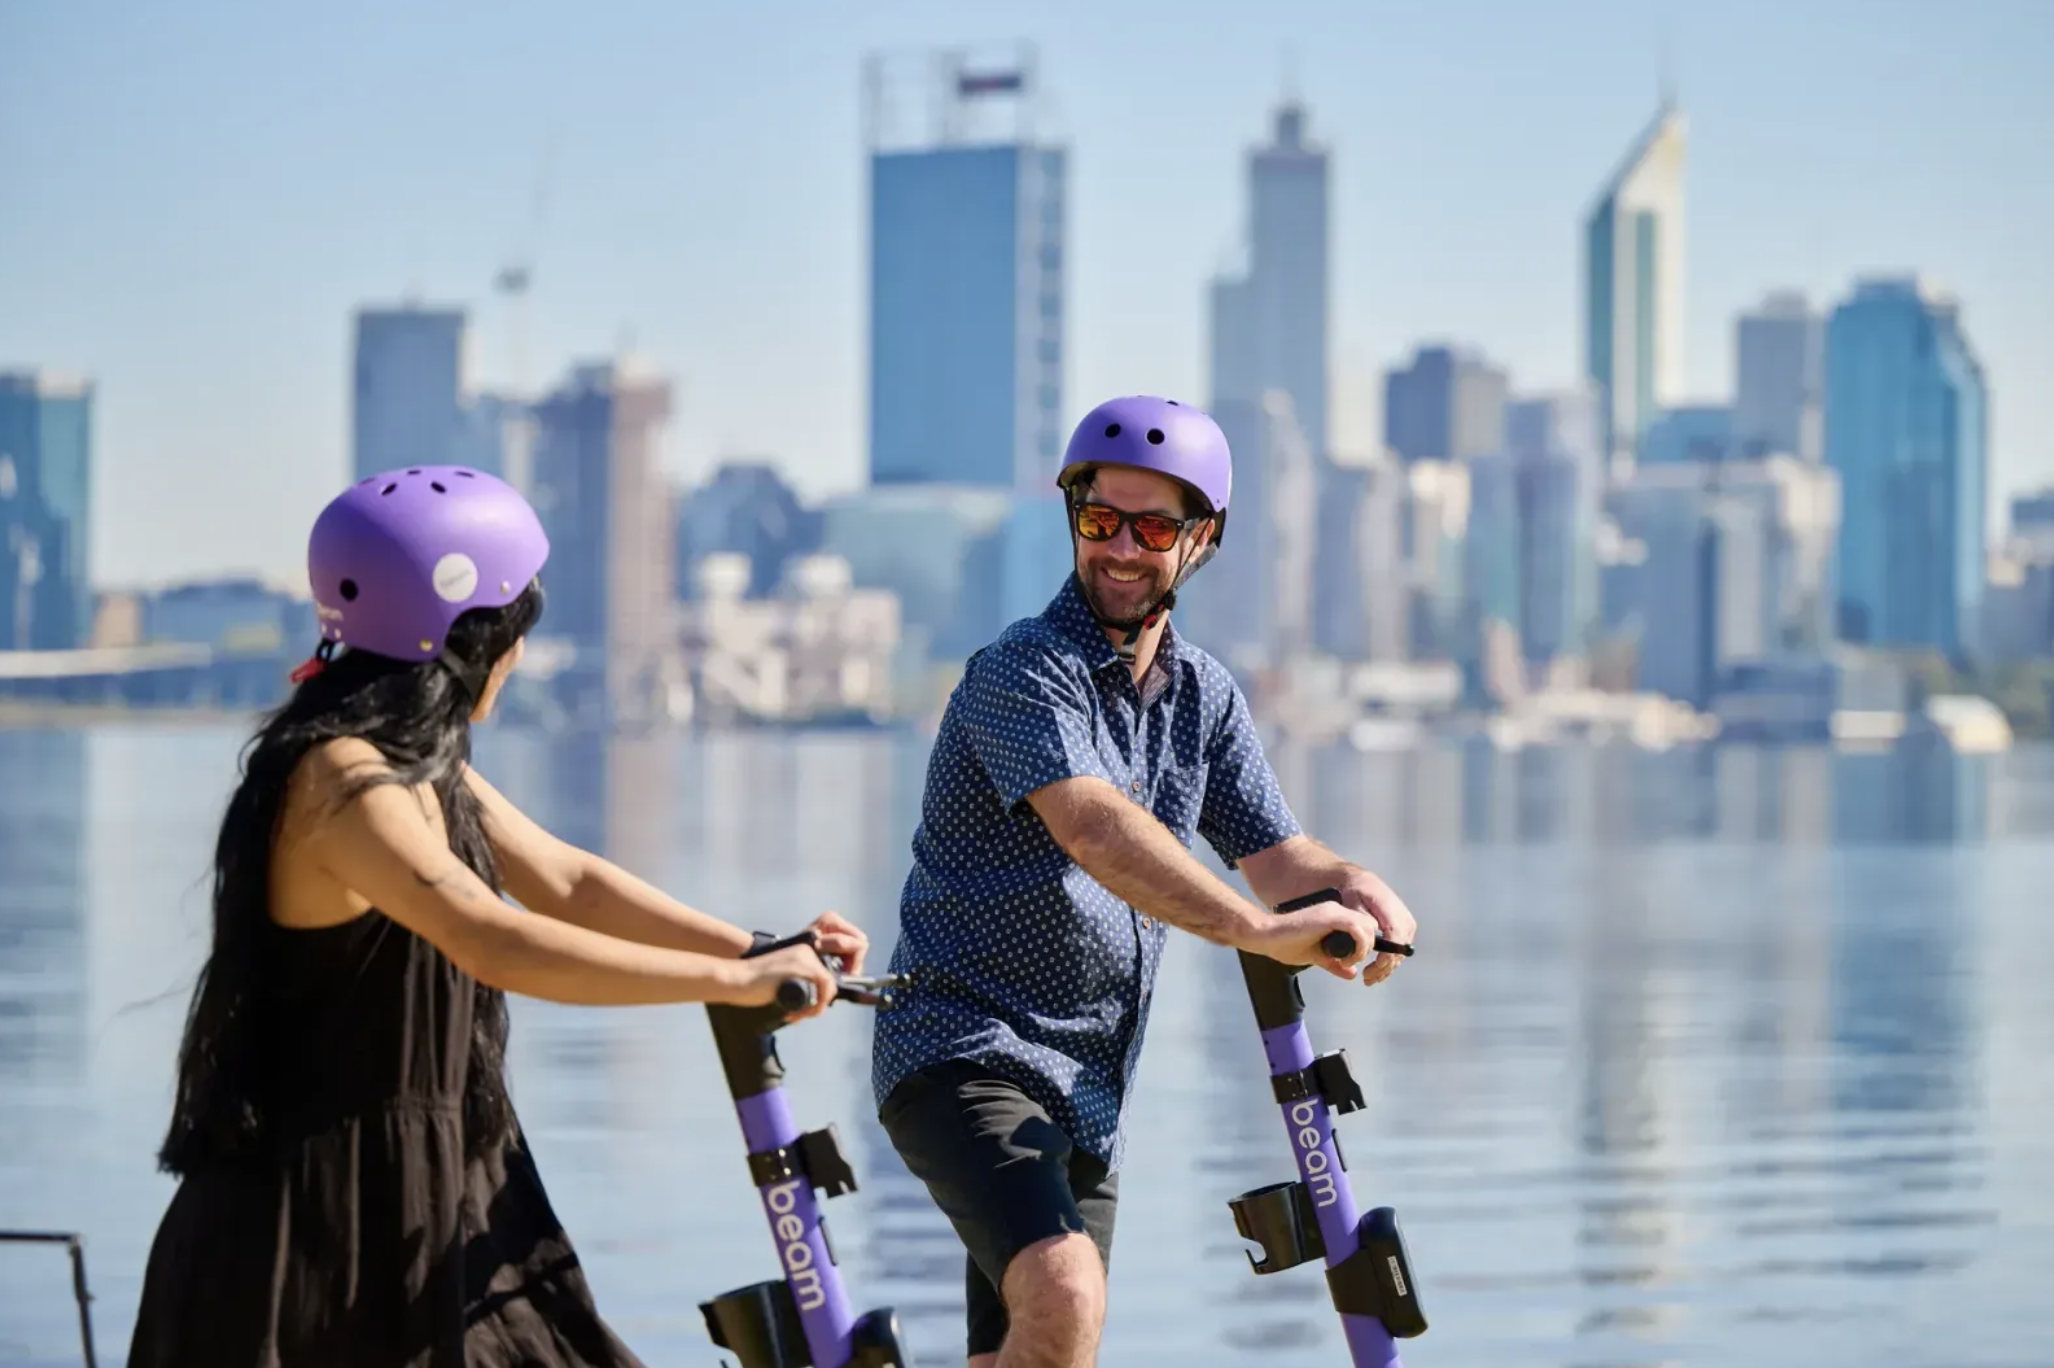 Beam brings its e-scooters to inner-city Perth